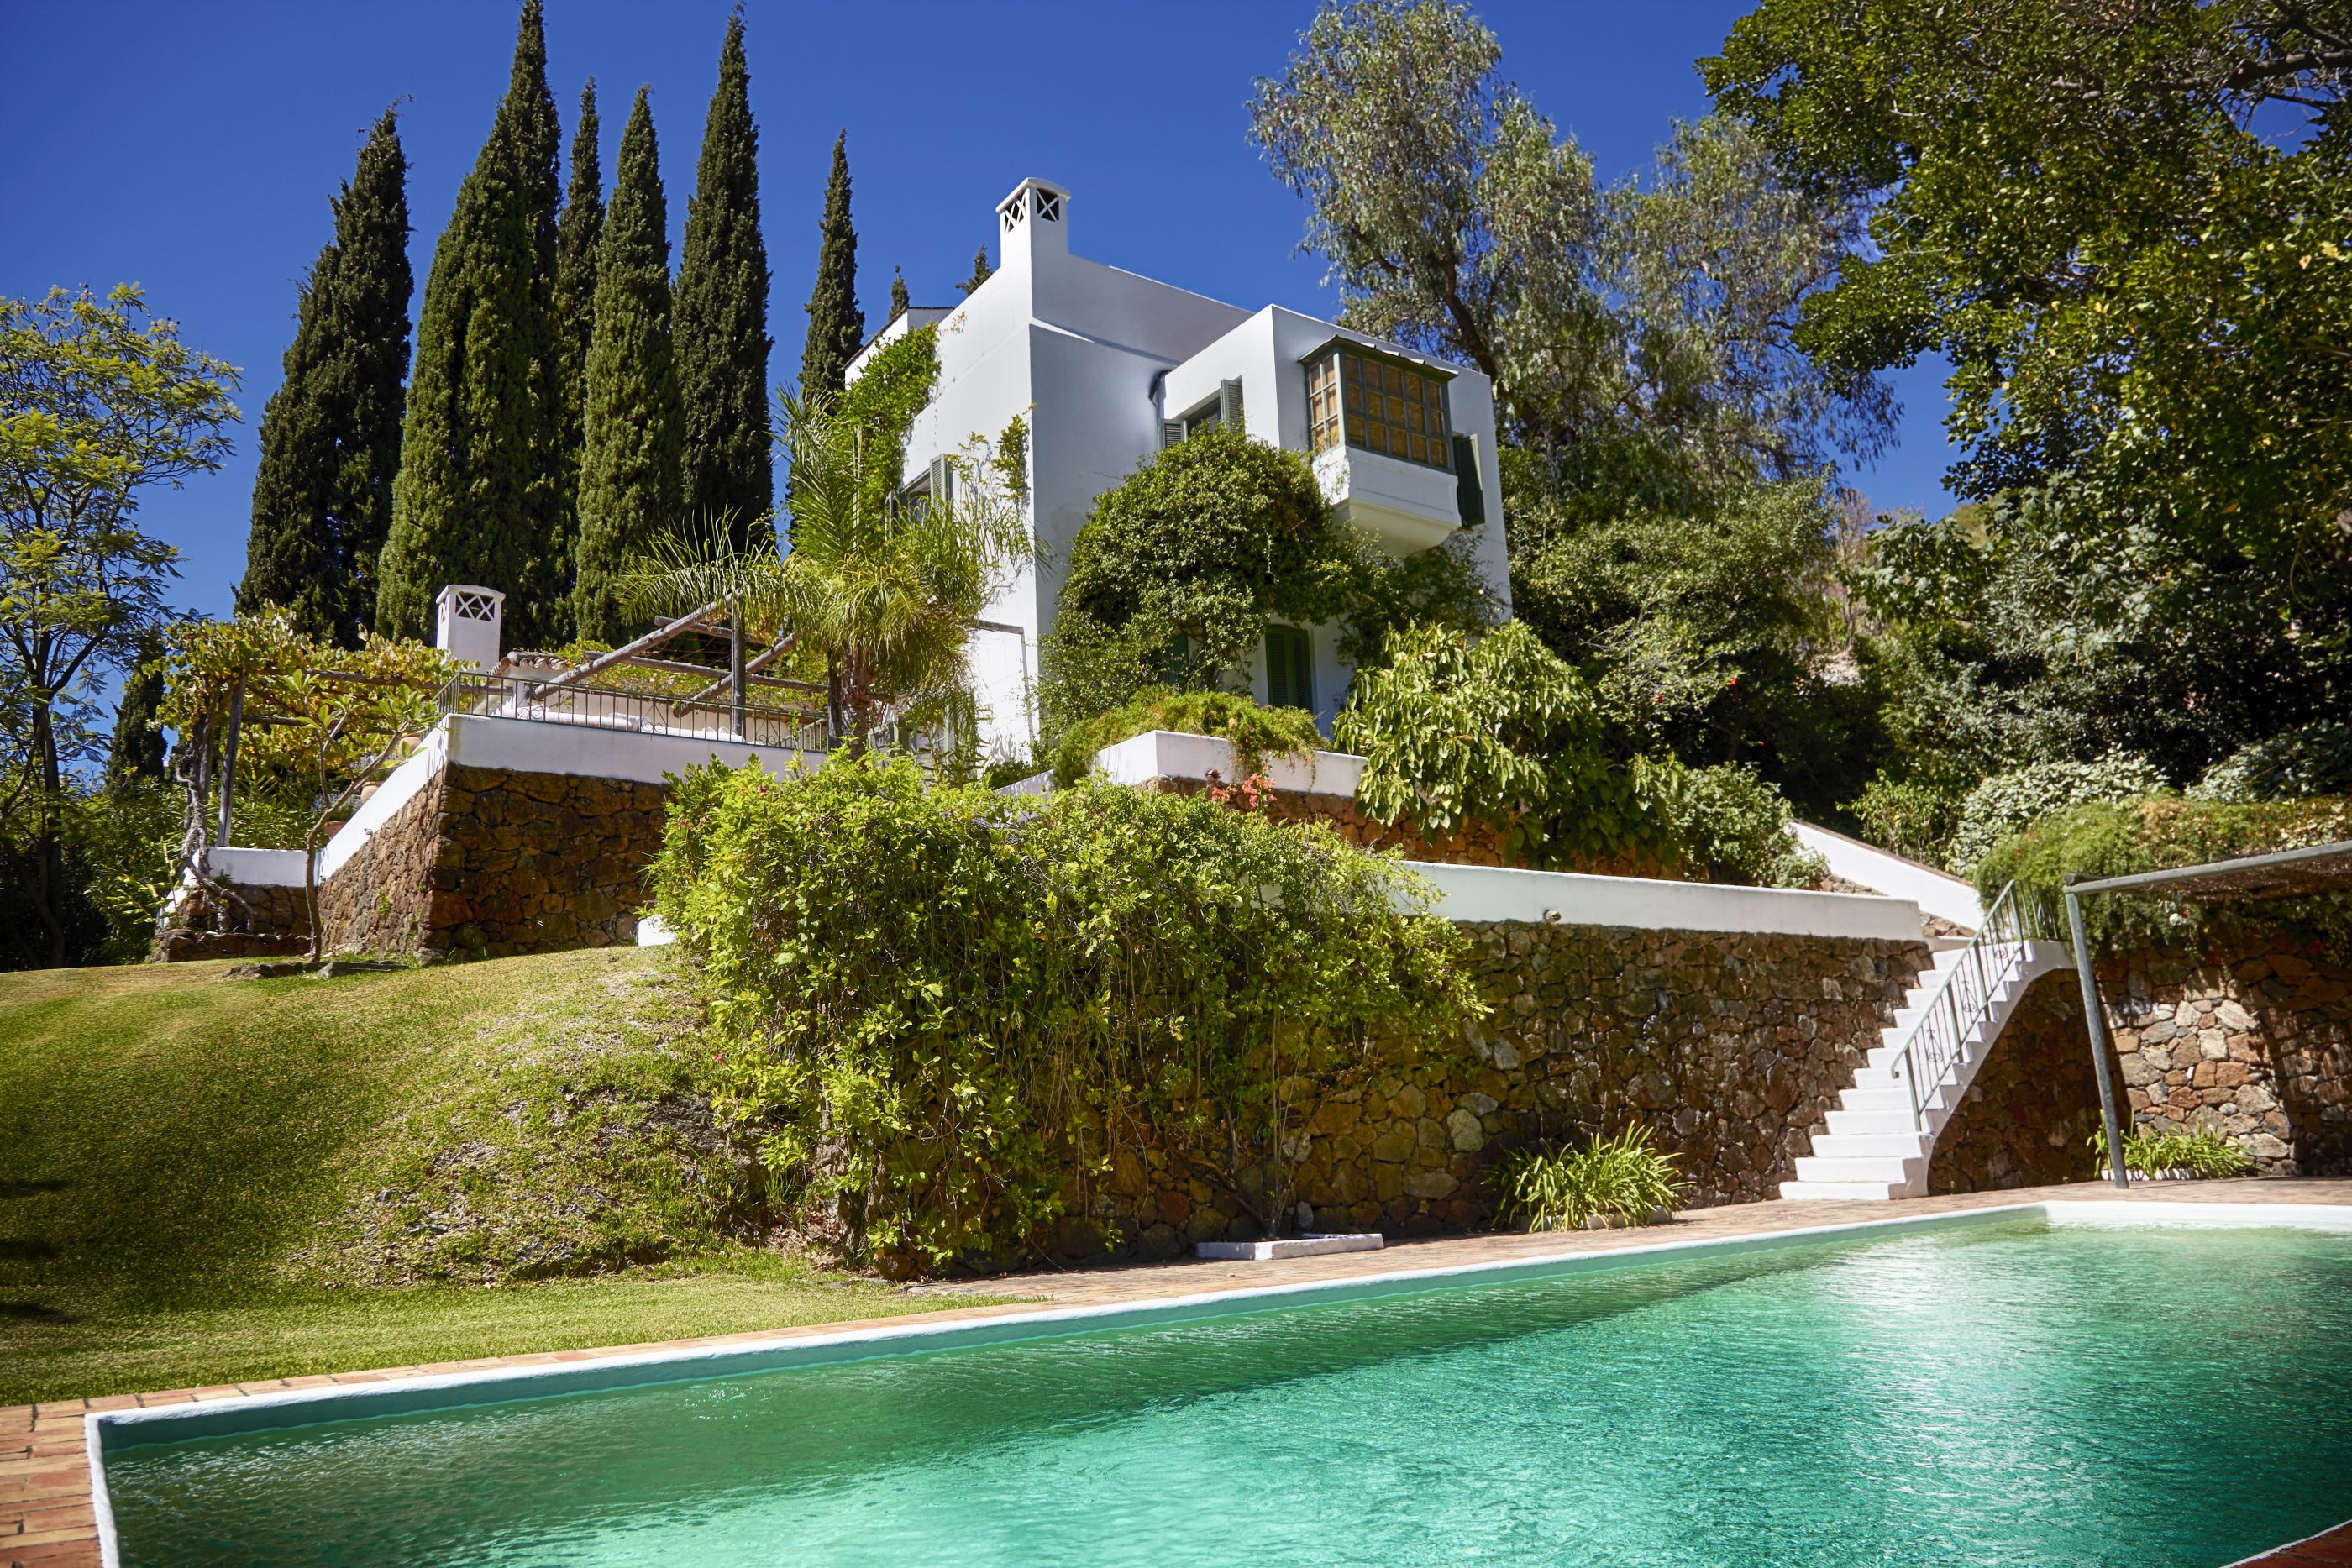 The facade and swimming pool of Tramores Estate, Andalucia